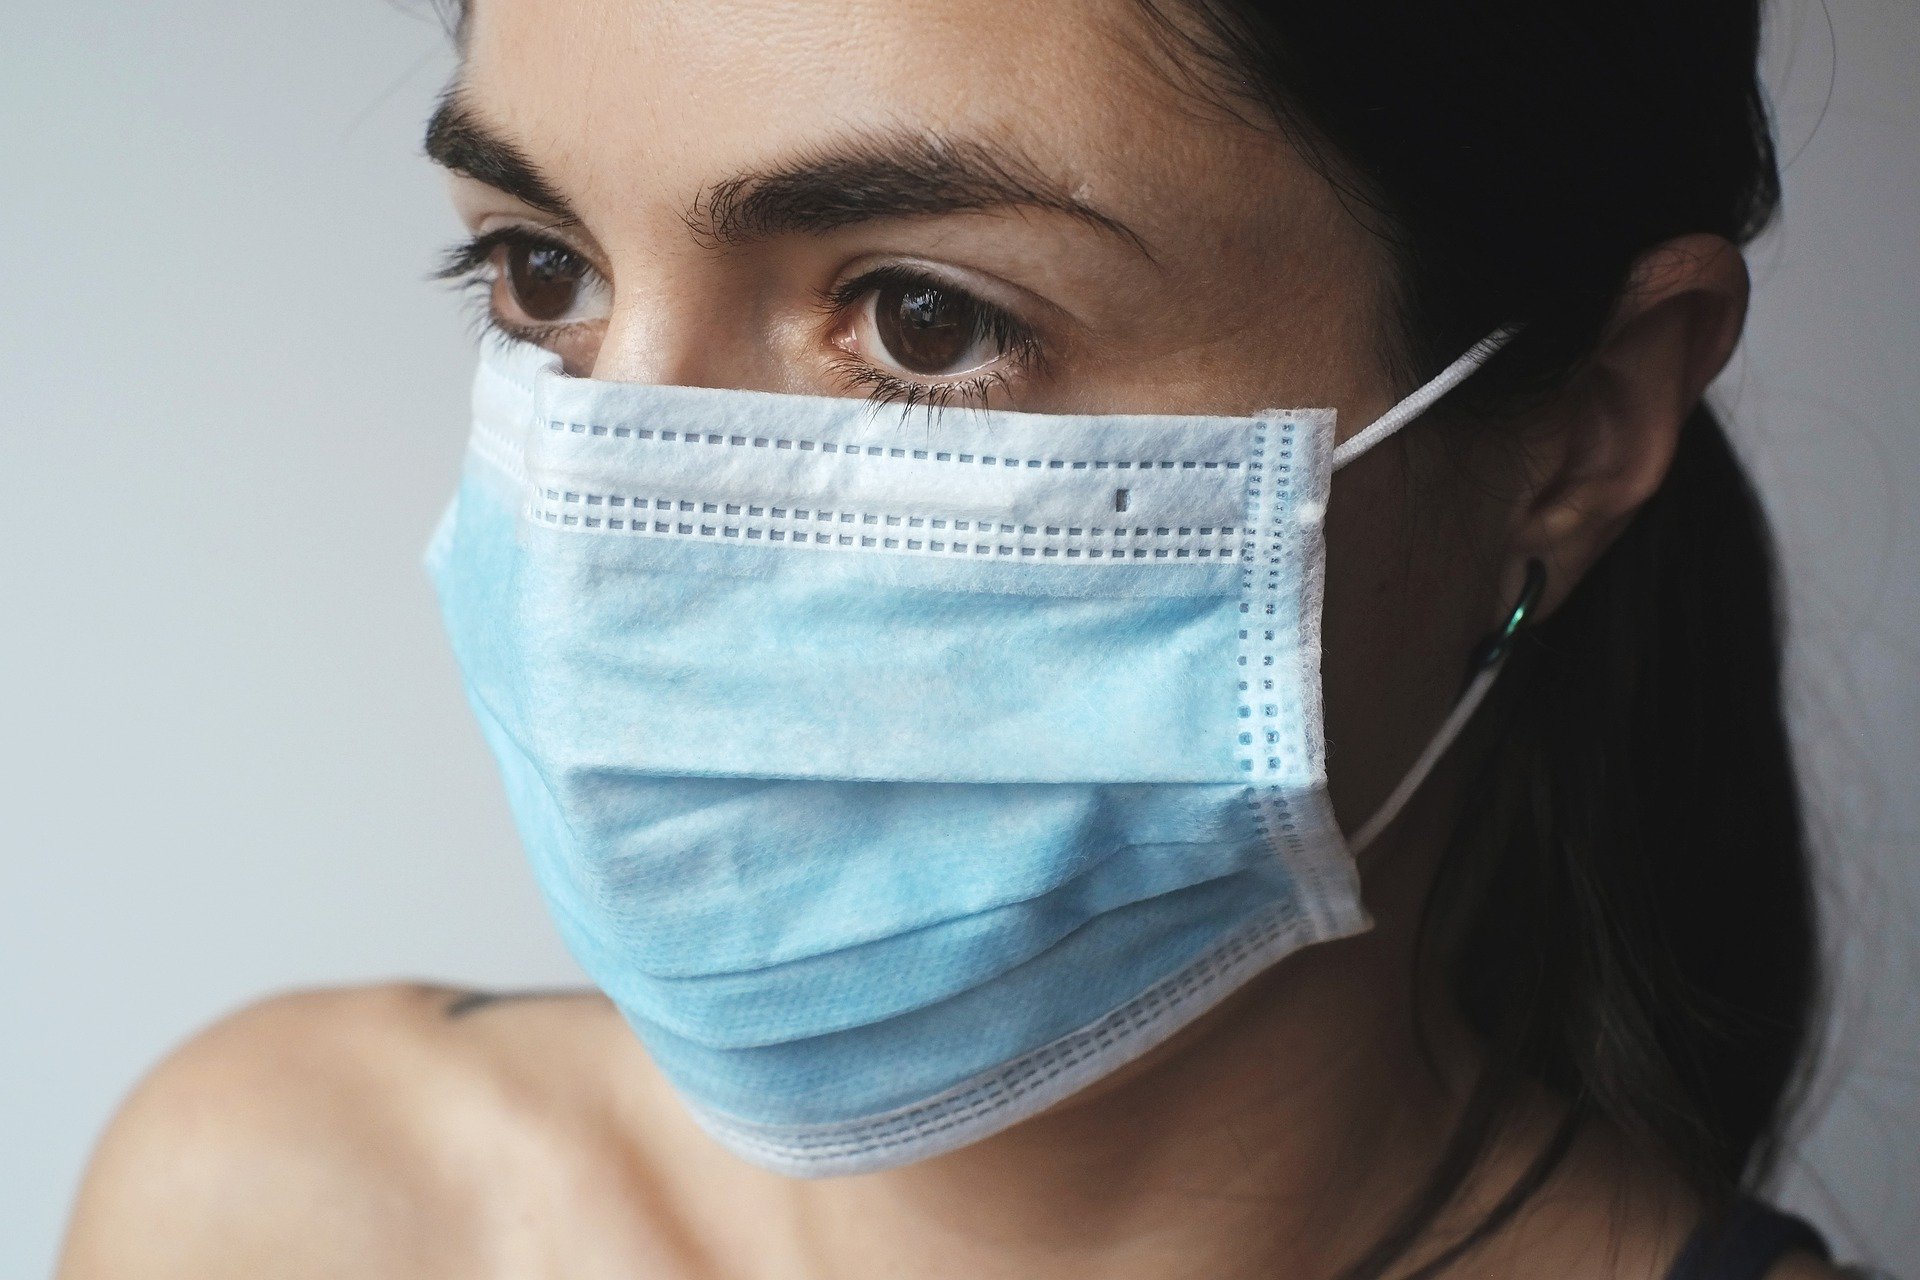 Can this be the final word on wearing fucking masks to prevent the spread of infection by a respiratory virus in uncontrolled environments?